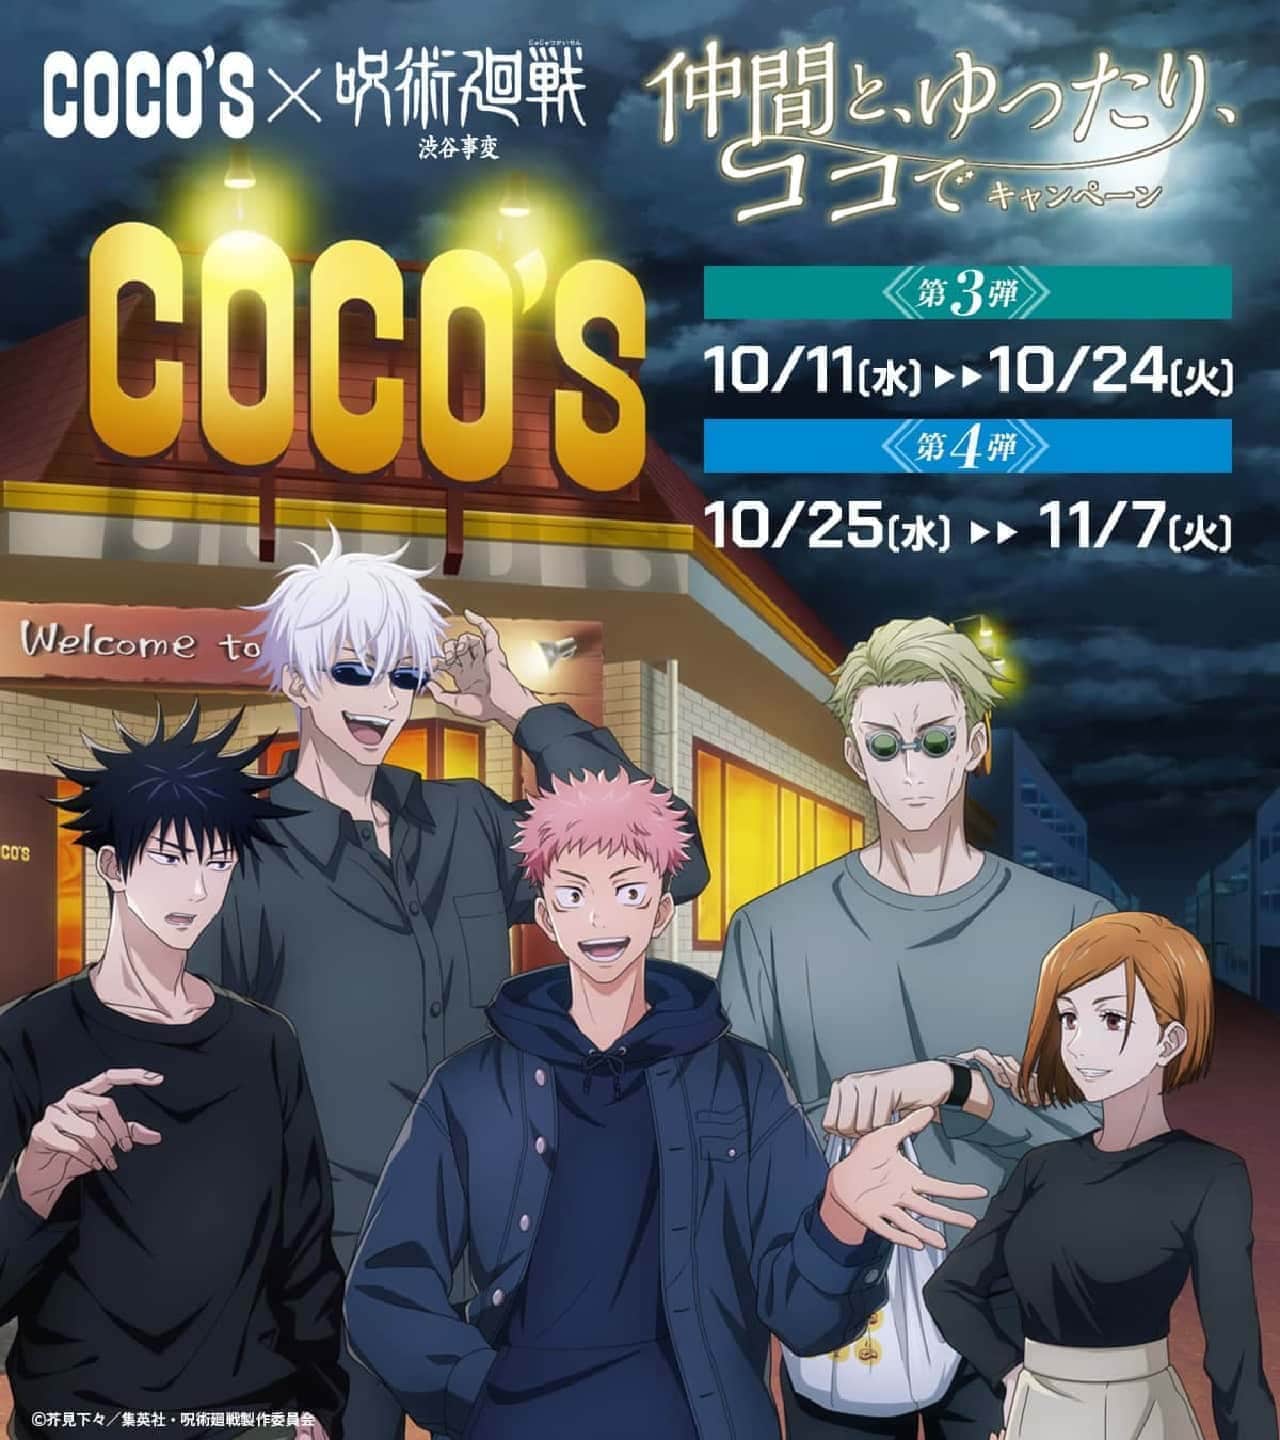 Cocos x Jutsu Kaisen Shibuya Incident: Campaign with friends, relax, here!